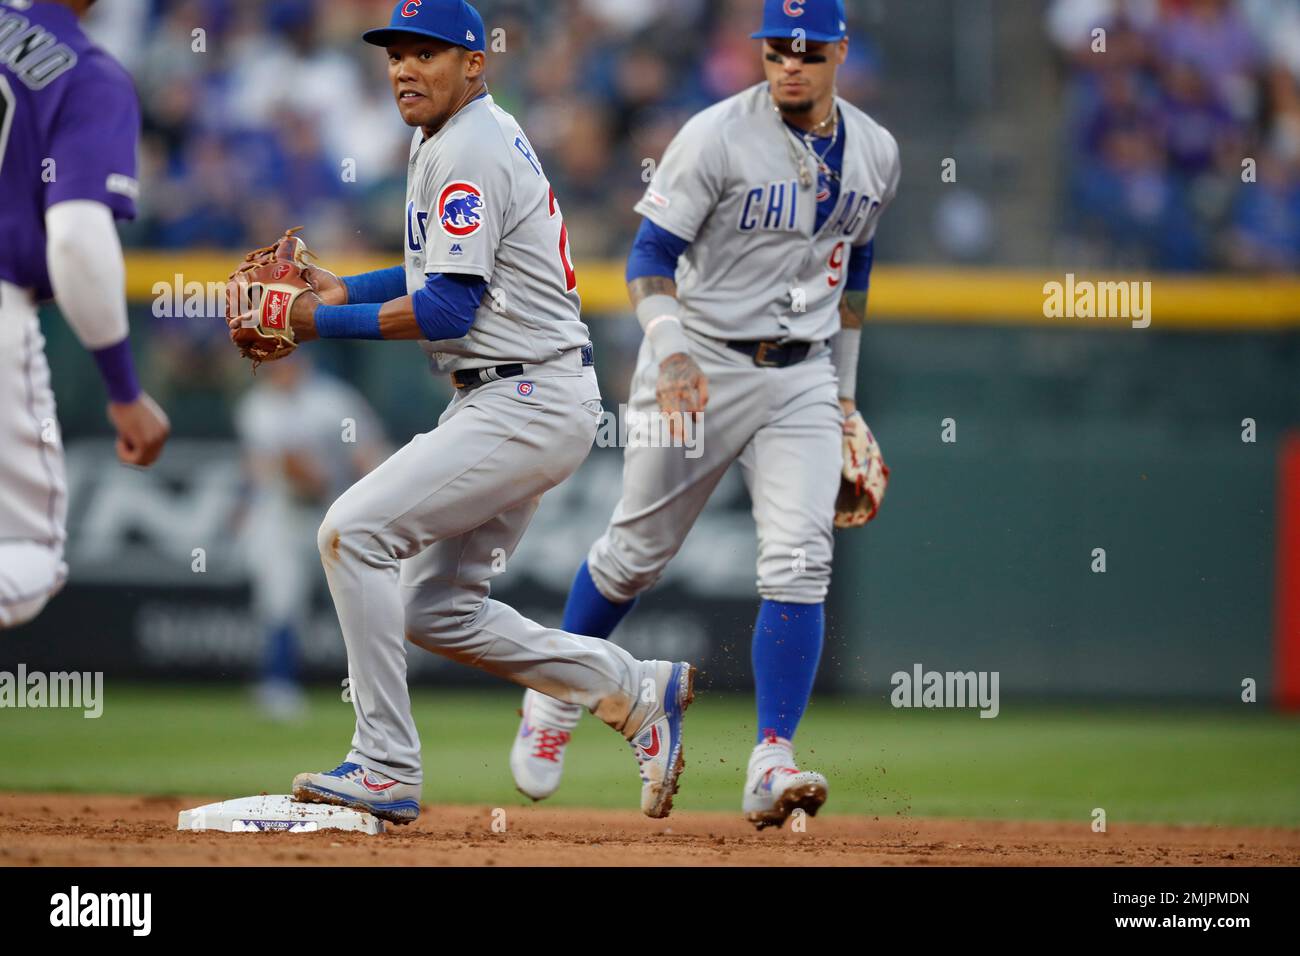 November 1, 2016: Cubs force Game 7 as Addison Russell ties World